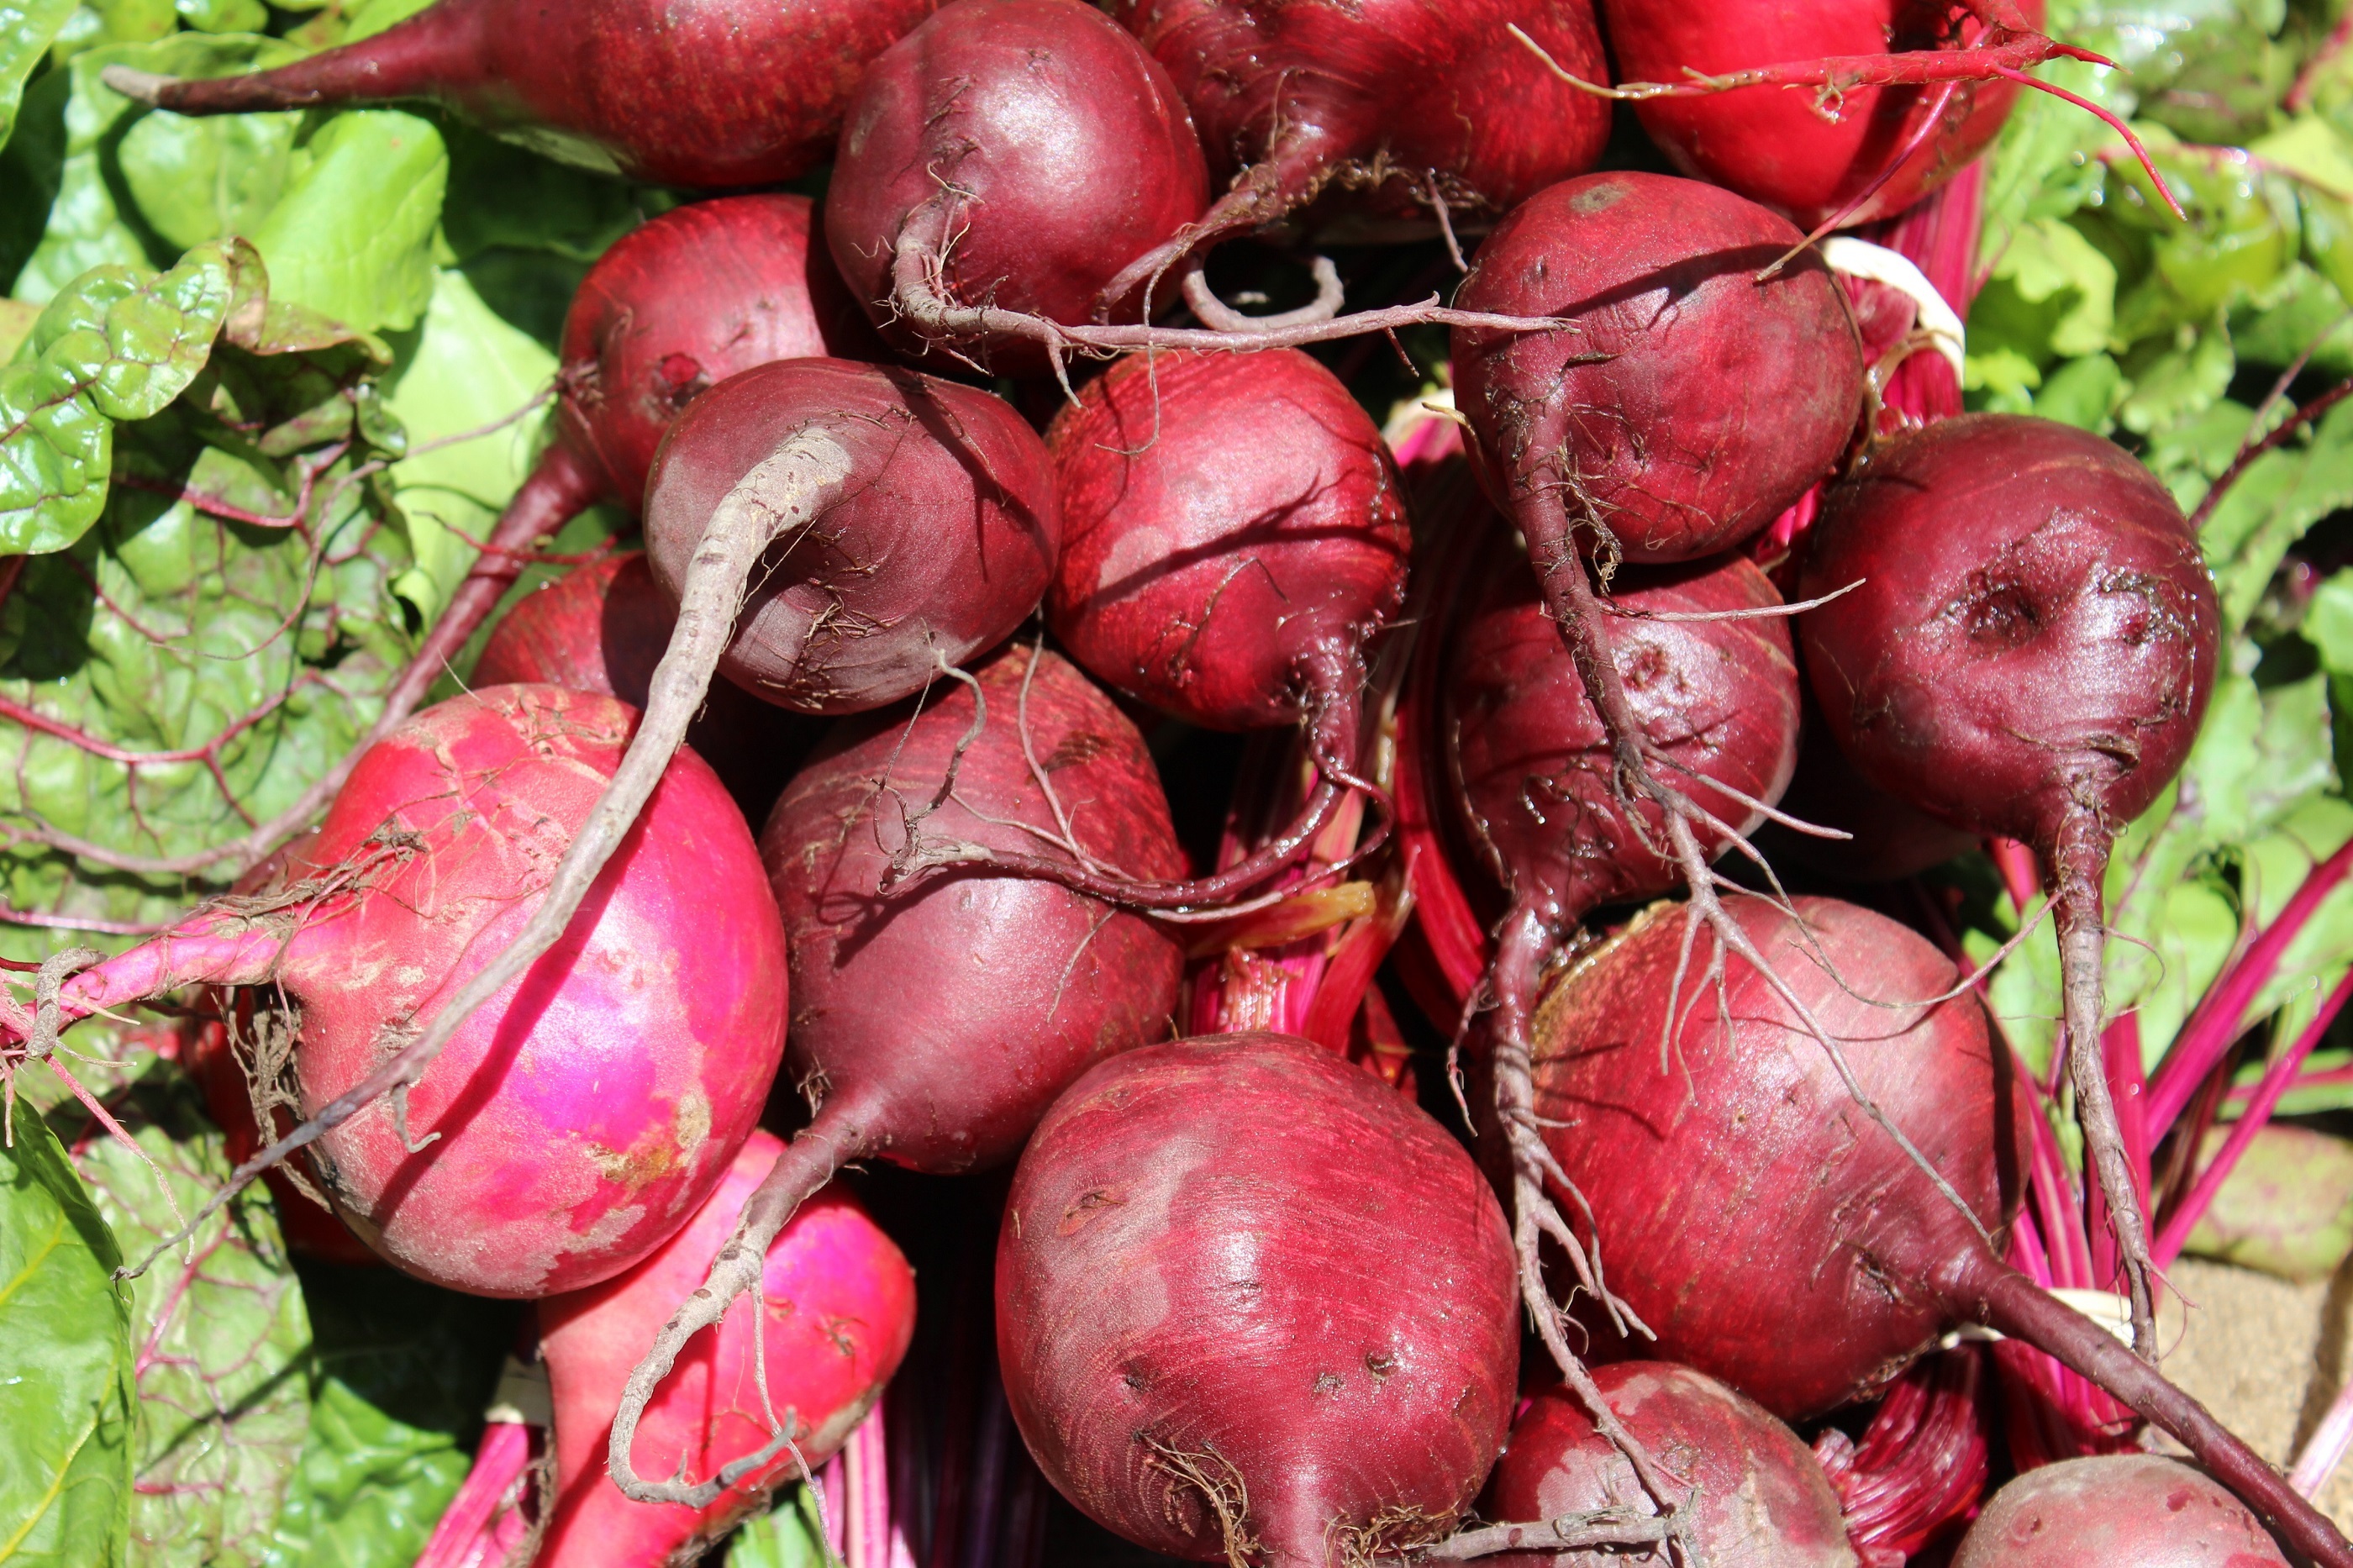 How to remove beet stains from anything and everything